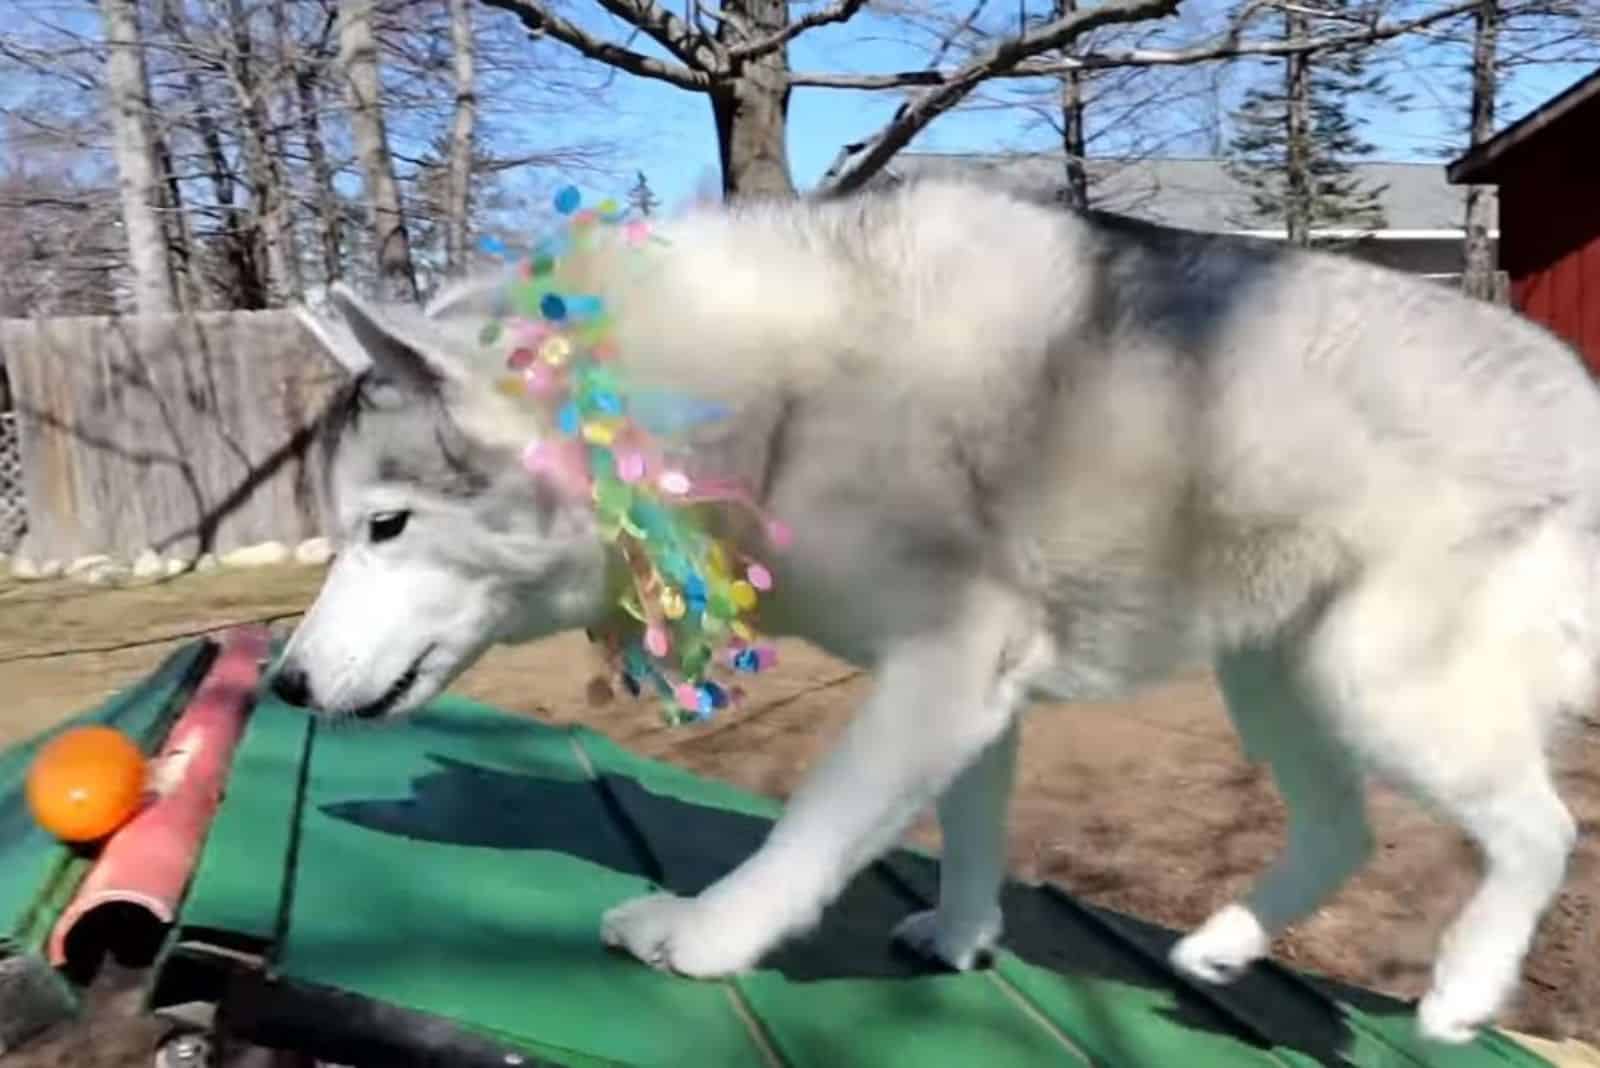 Husky found an egg on the roof